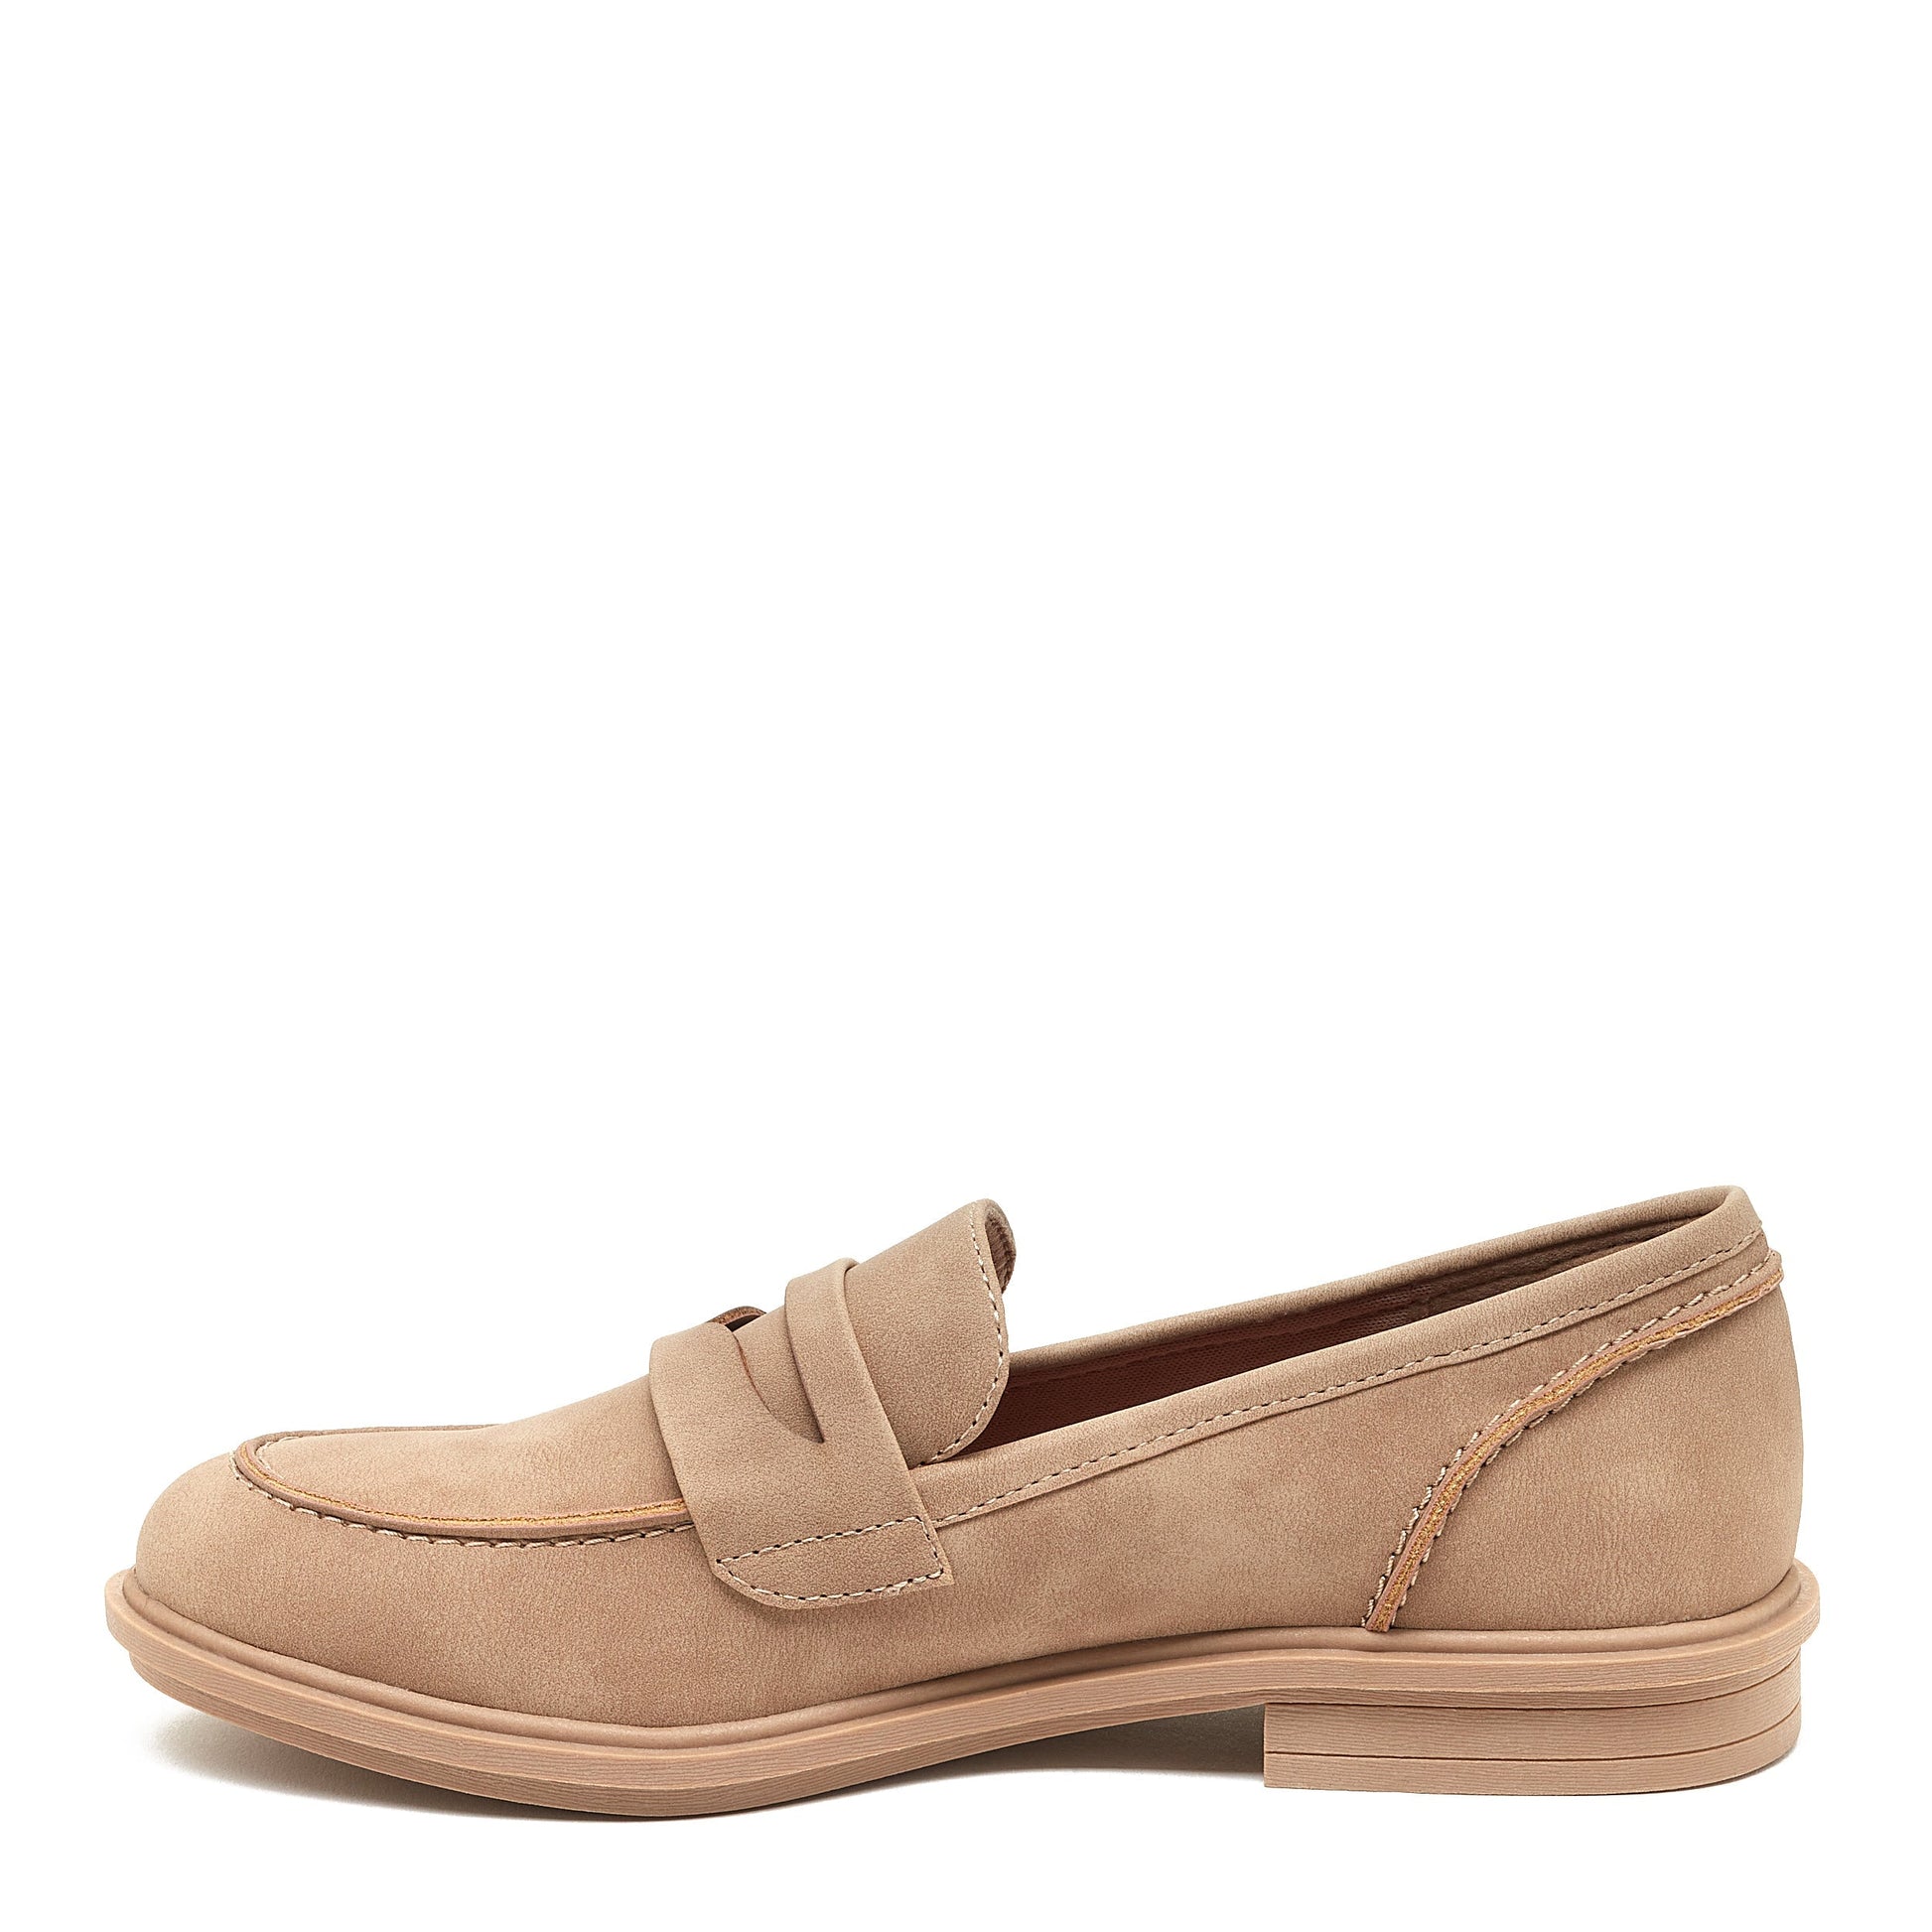 Rocket Dog® Women's Gabby Taupe Loafer